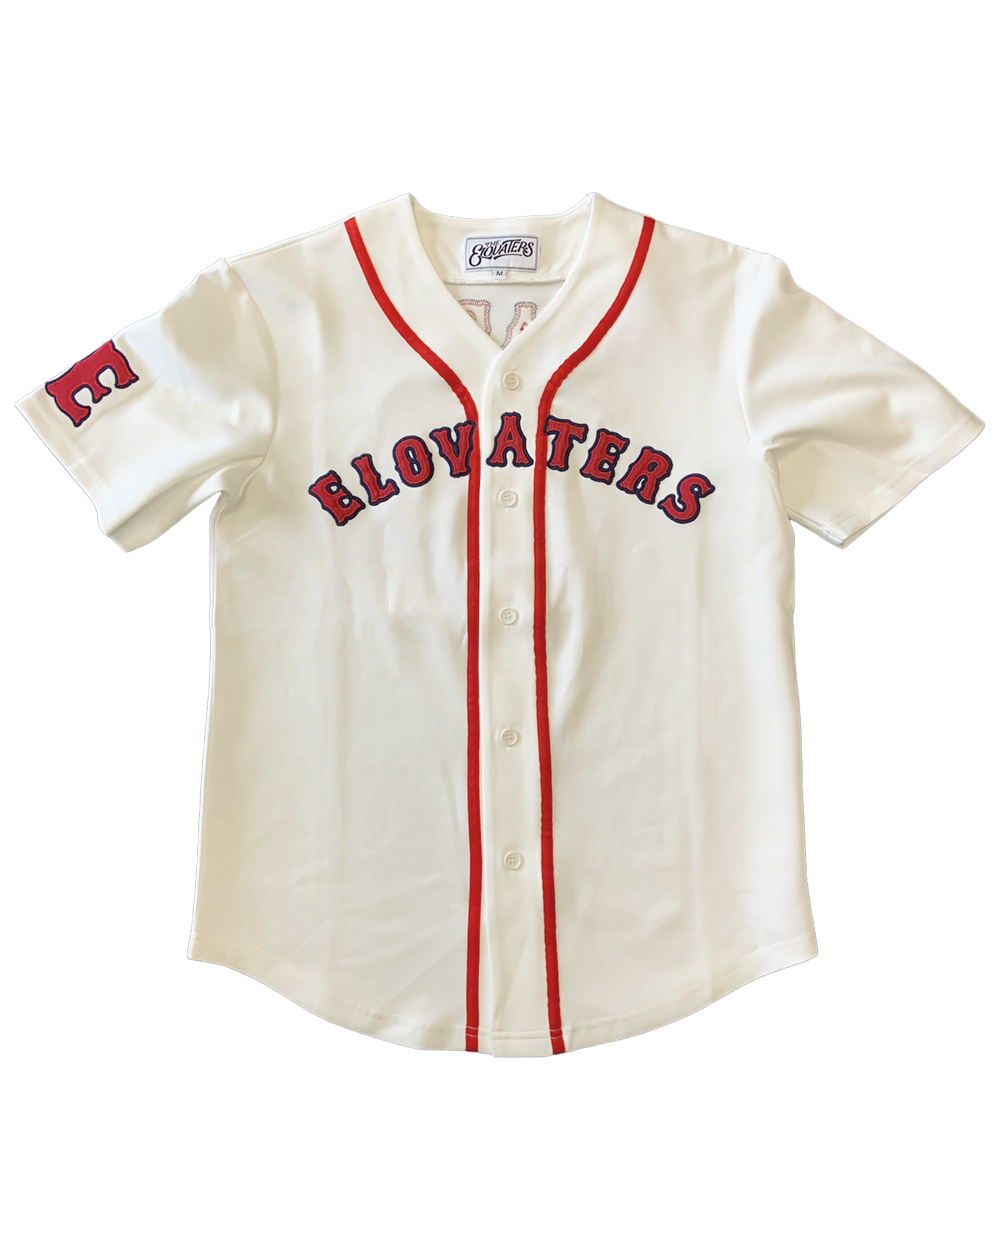 The Elovaters Baseball Jersey (White)